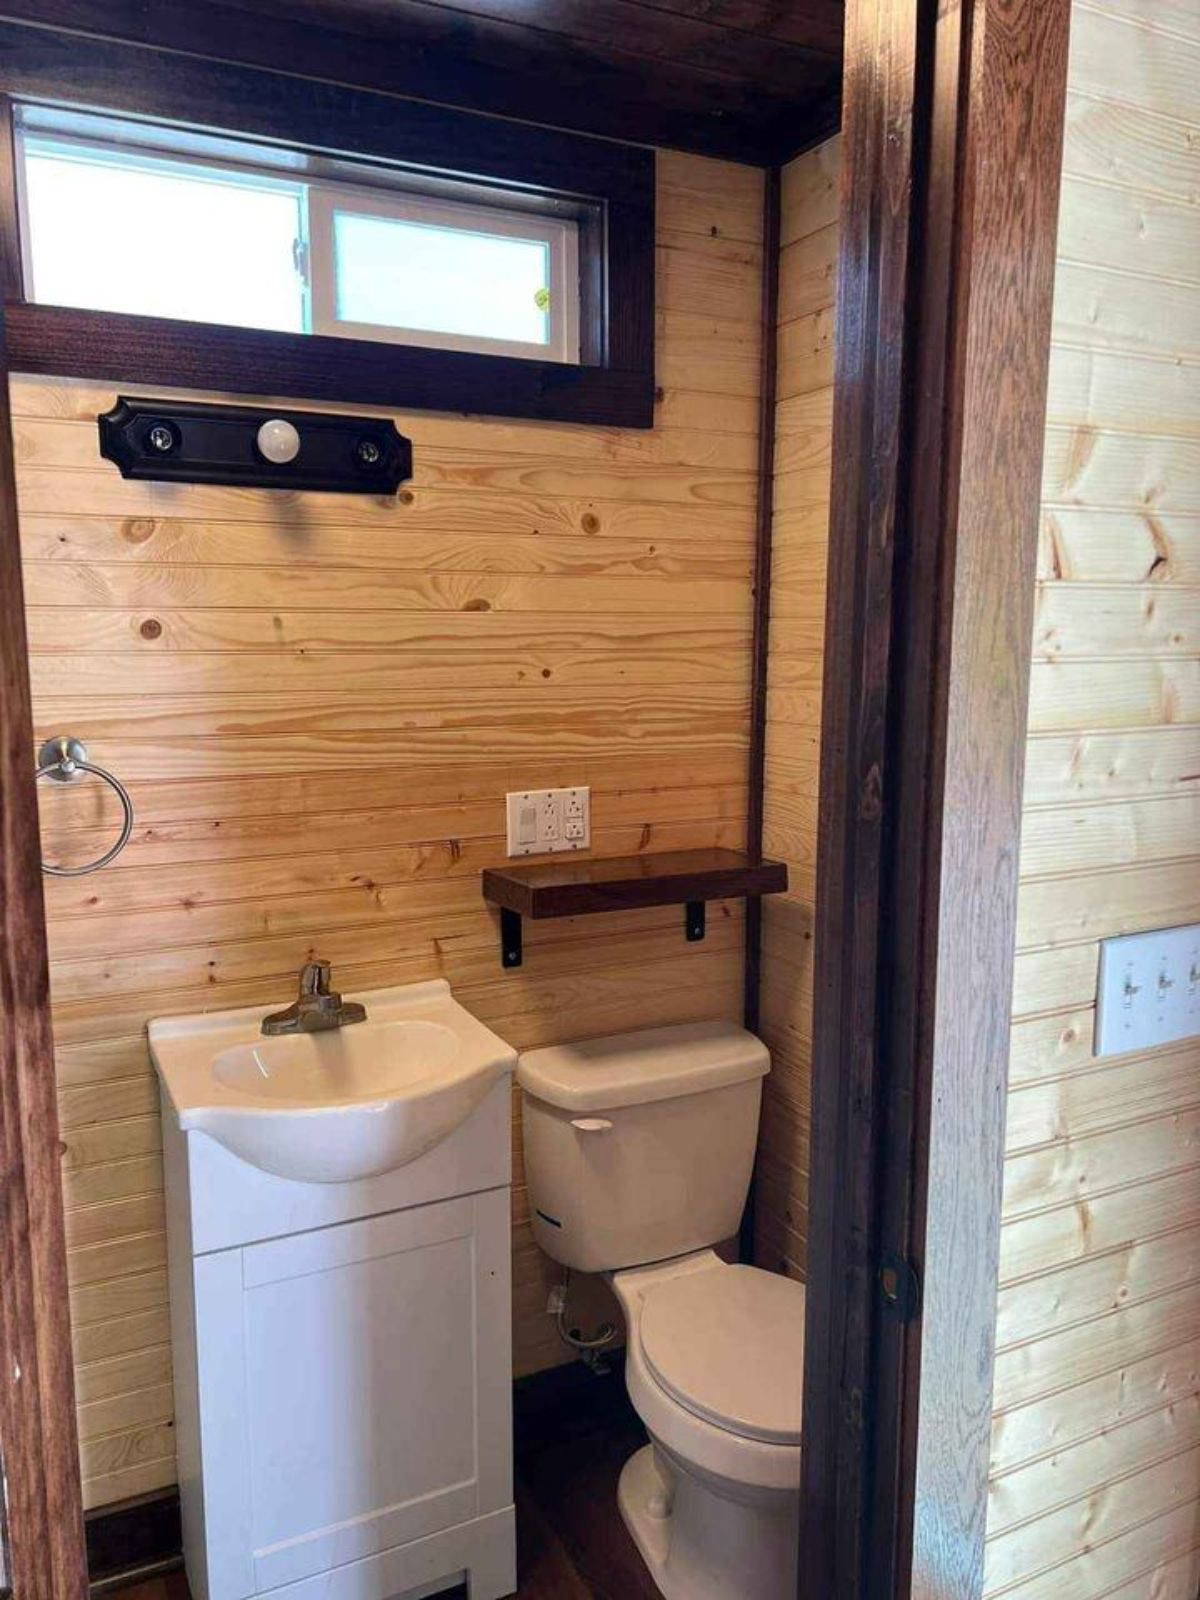 Bathroom of Spacious Tiny House has a standard toilet and sink with vanity and mirror